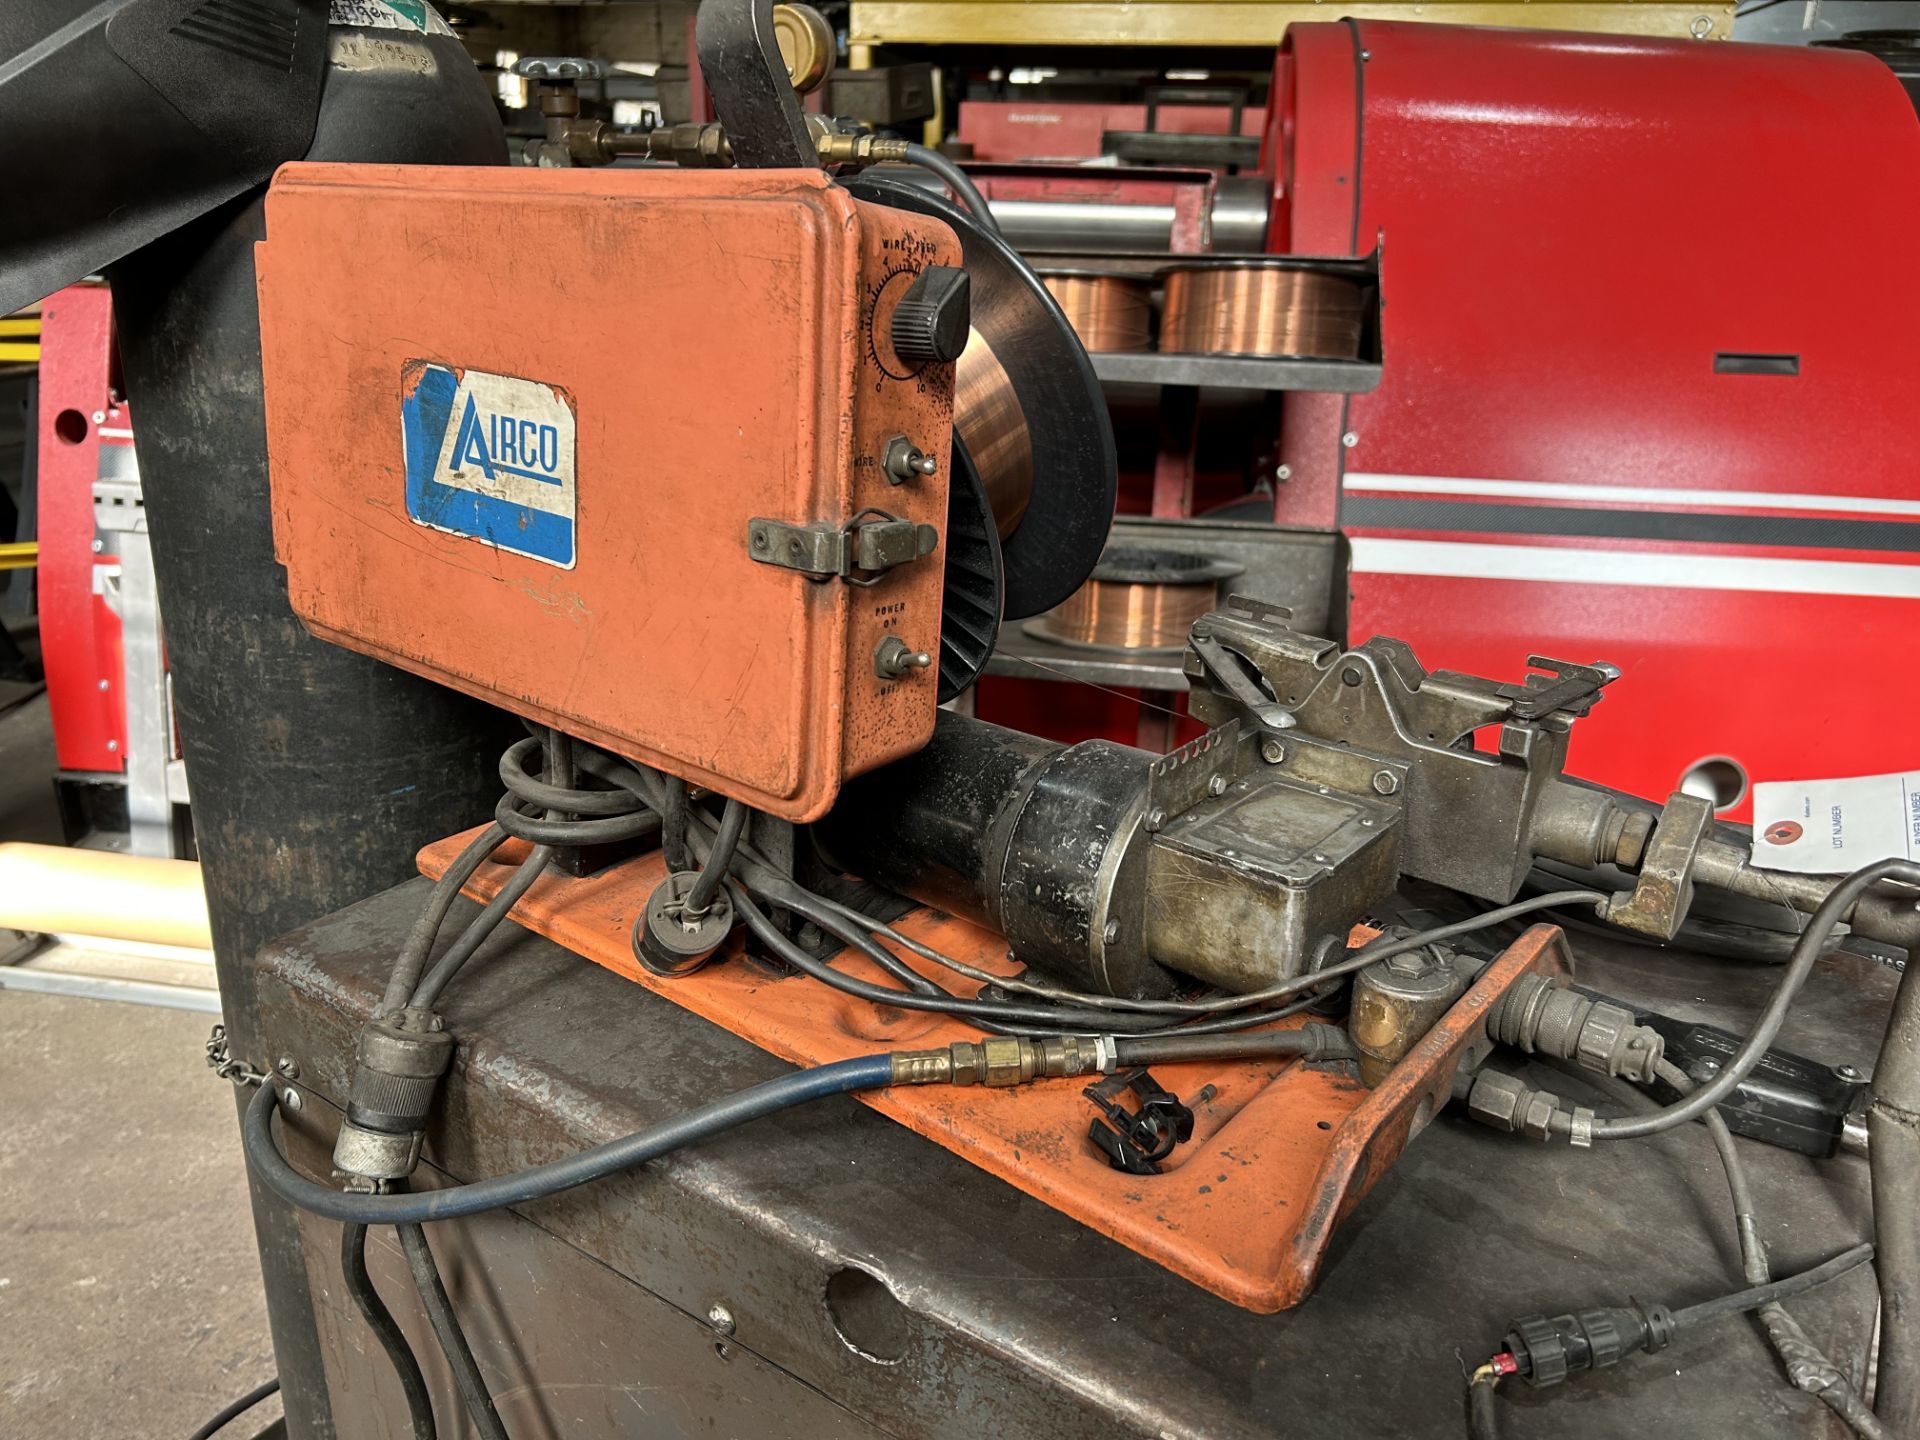 M&T 300 Amp Wire Feed Welder w/ Airco Wire Feeder, 230/460/3/60 - Image 2 of 2